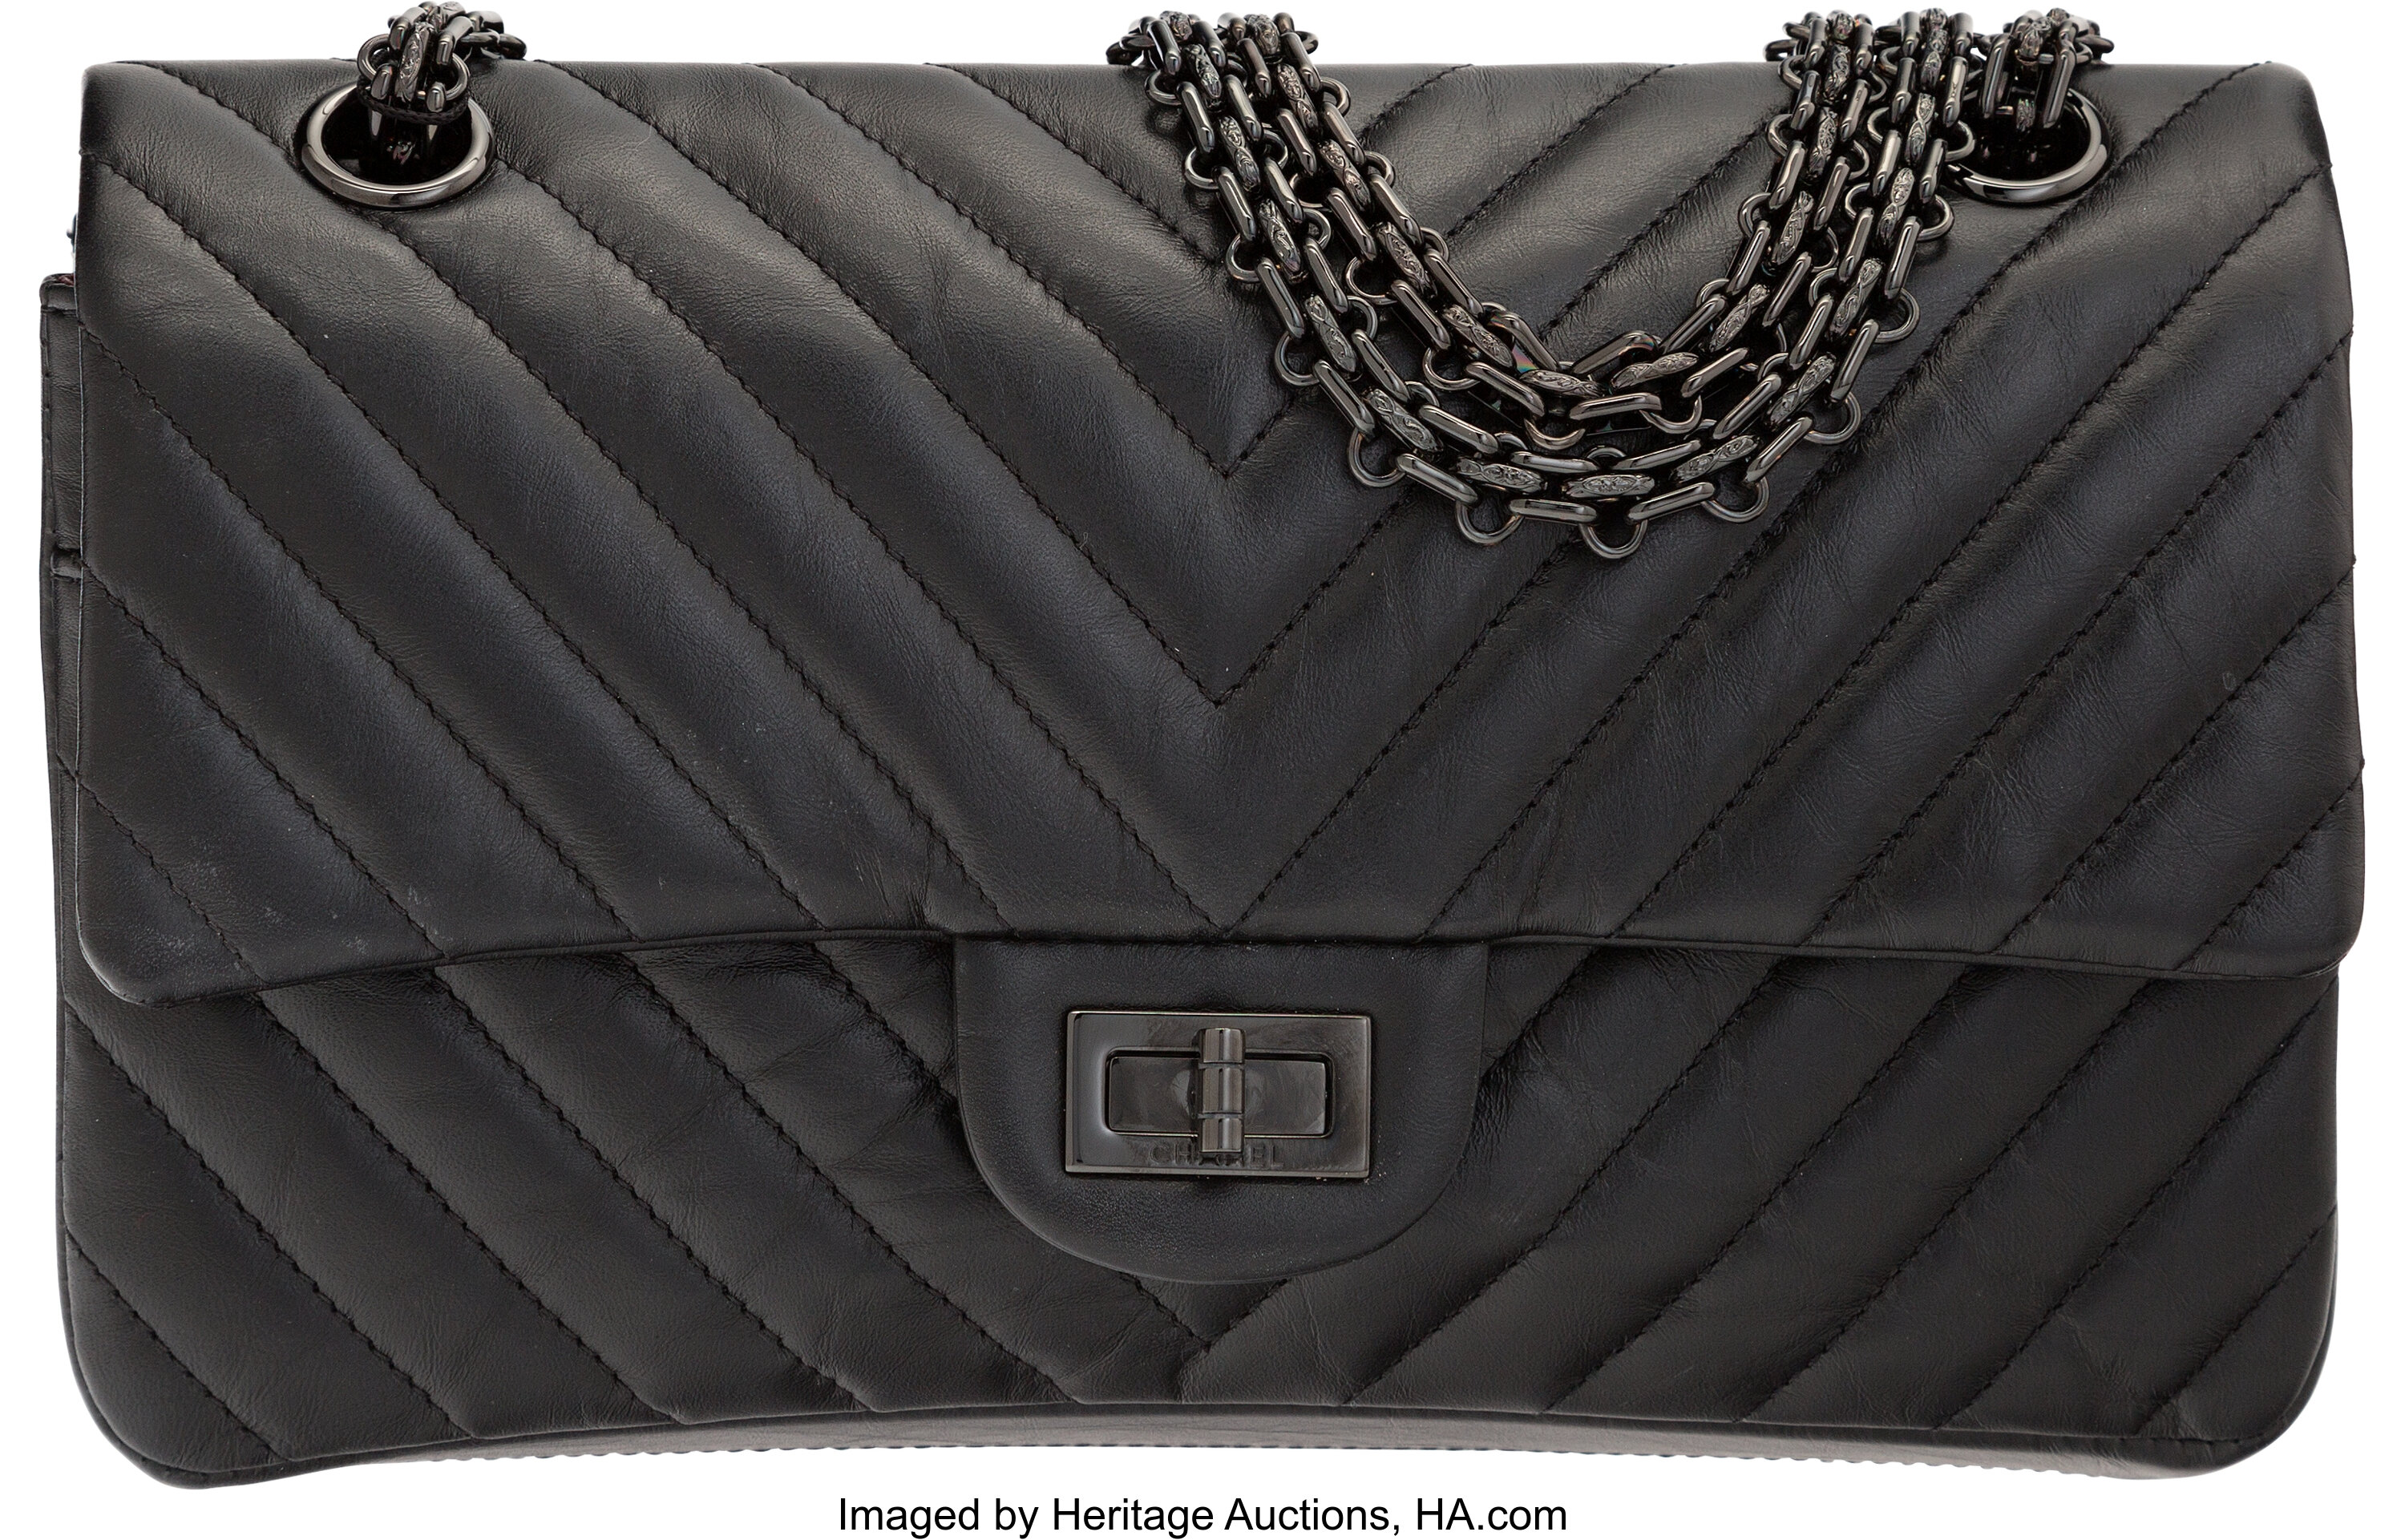 Chanel So Black Aged Chevron Quilted Lambskin Leather 2.55 Reissue